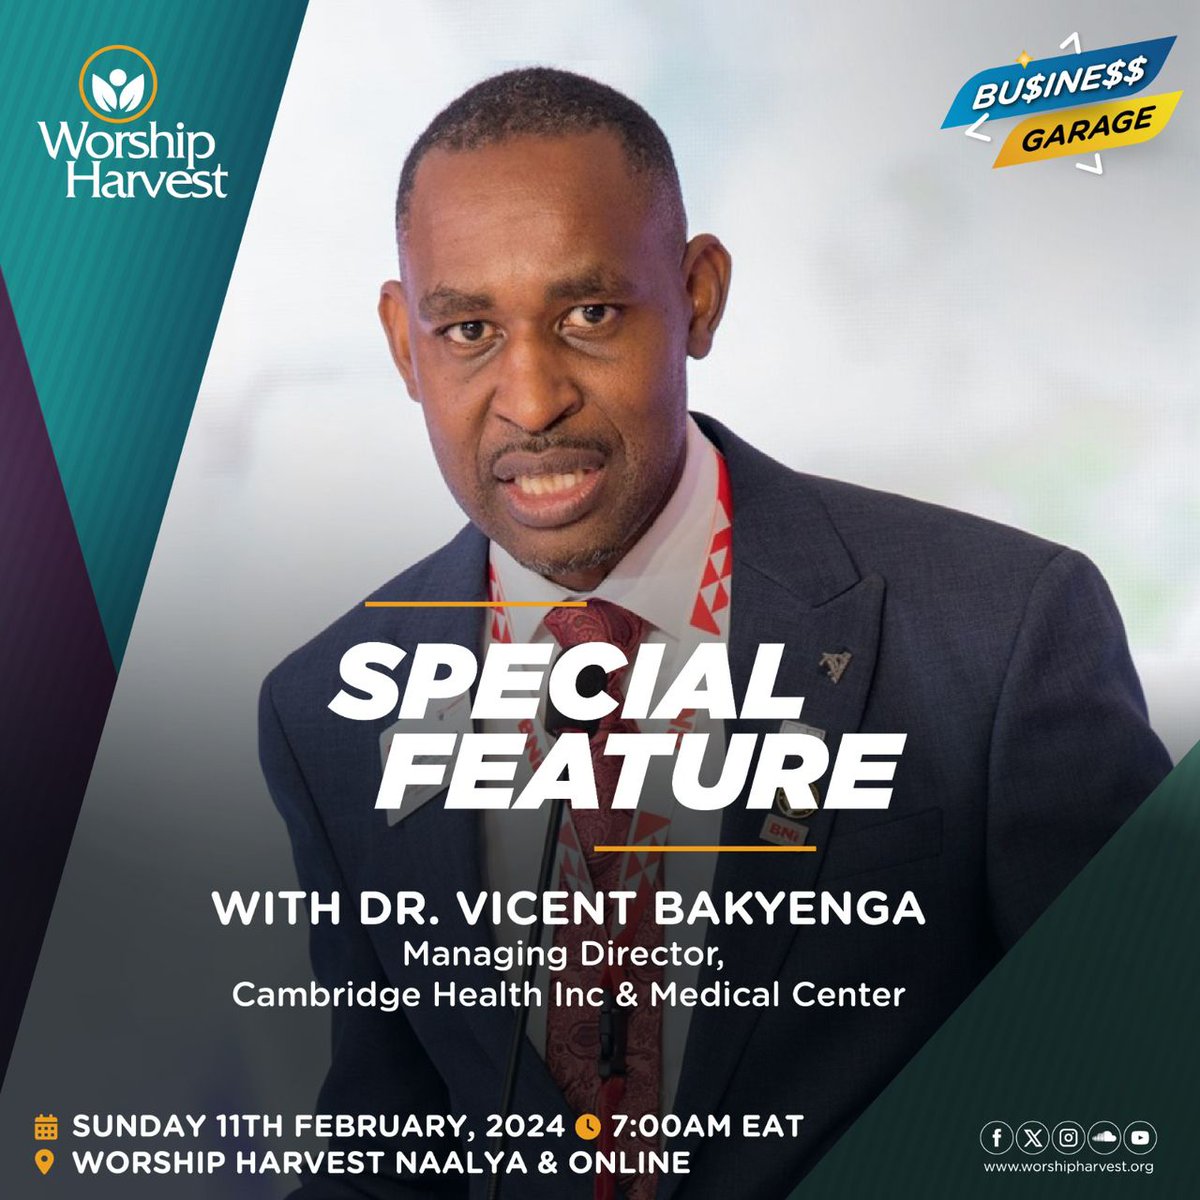 @CHealthUG is a premium healthcare facility located within the Heart of Kampala. Tomorrow, we host @VBakyenga Managing Director @CHealthUG for #BusinessGarage. You are welcome to join us in person at #WHNaalya or Online from 7 am to 8:30 am #WorshipHarvest